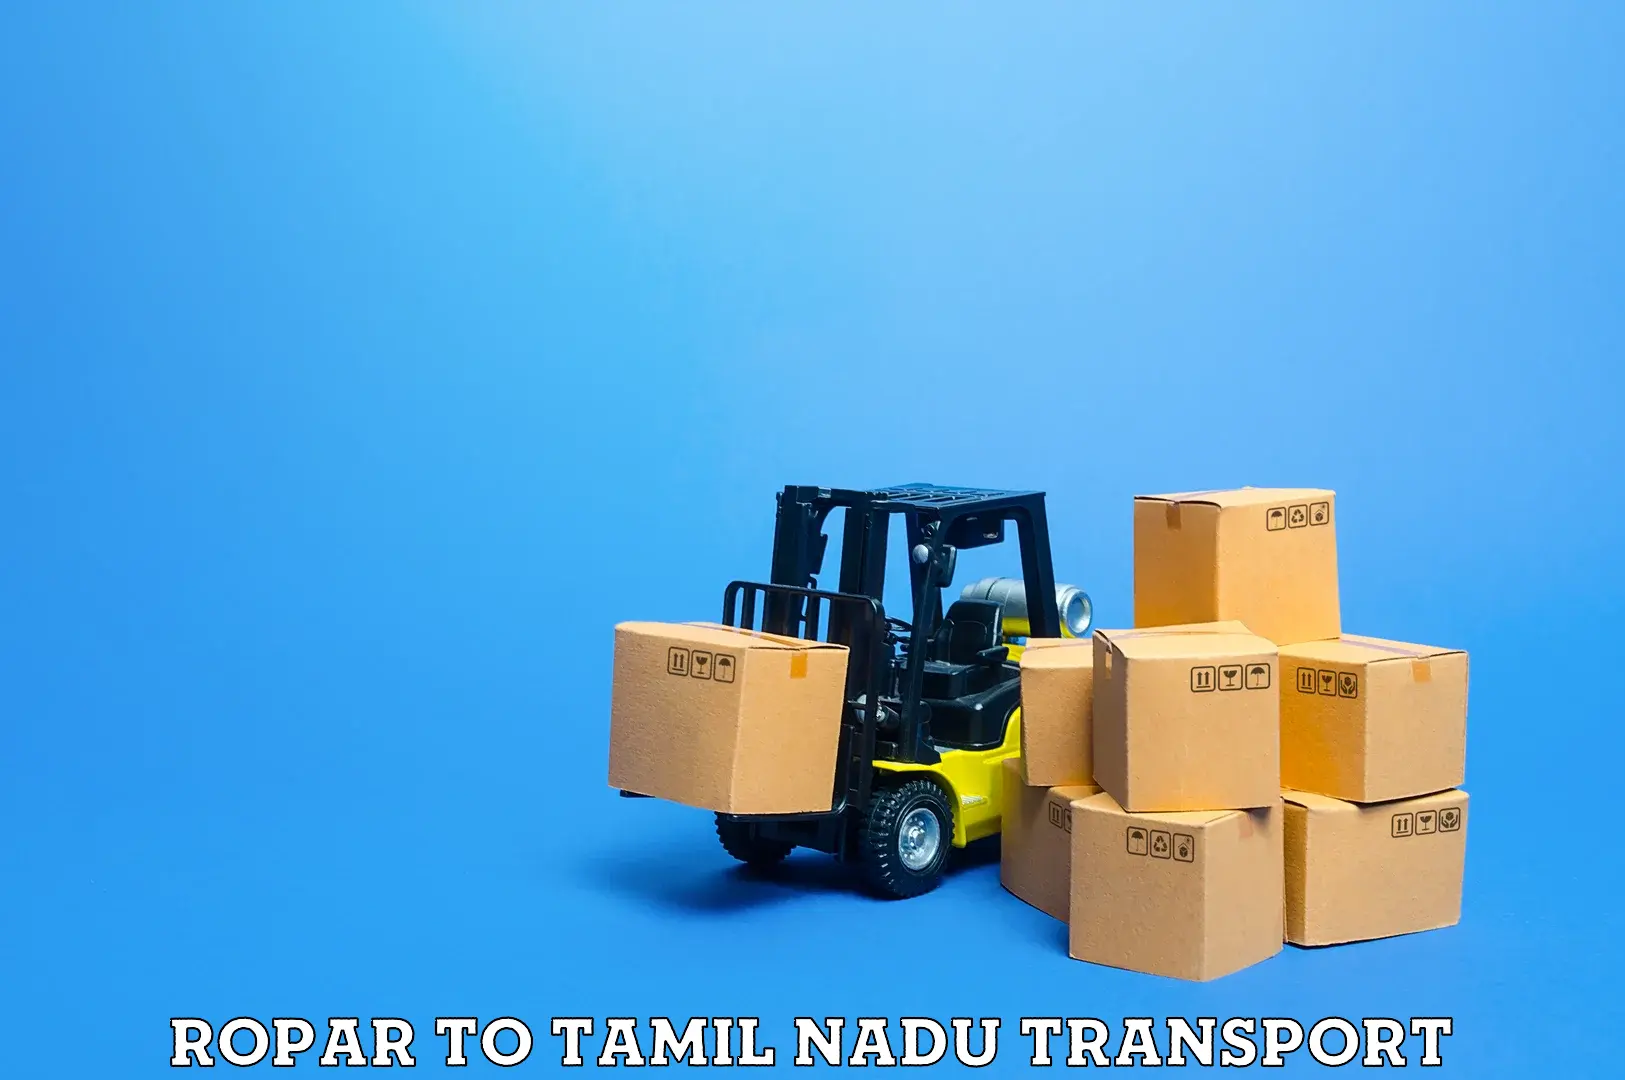 Container transport service Ropar to Chengalpattu